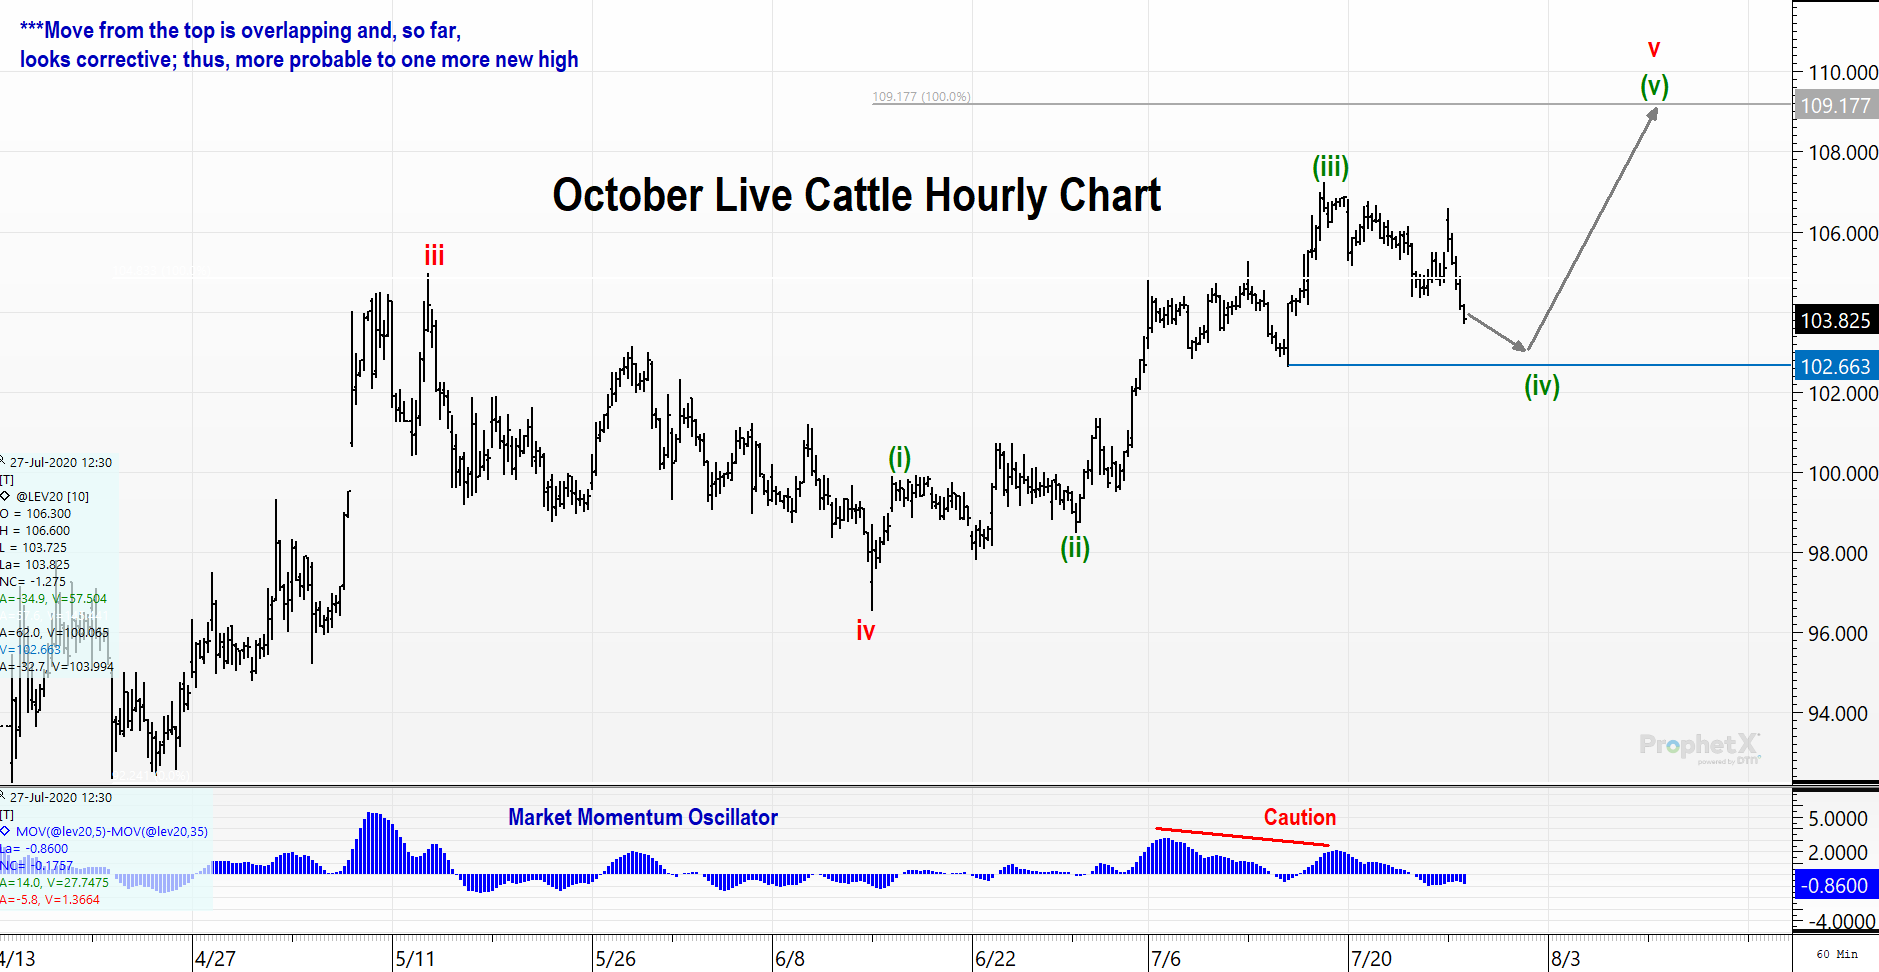 October Live Cattle Hourly Chart